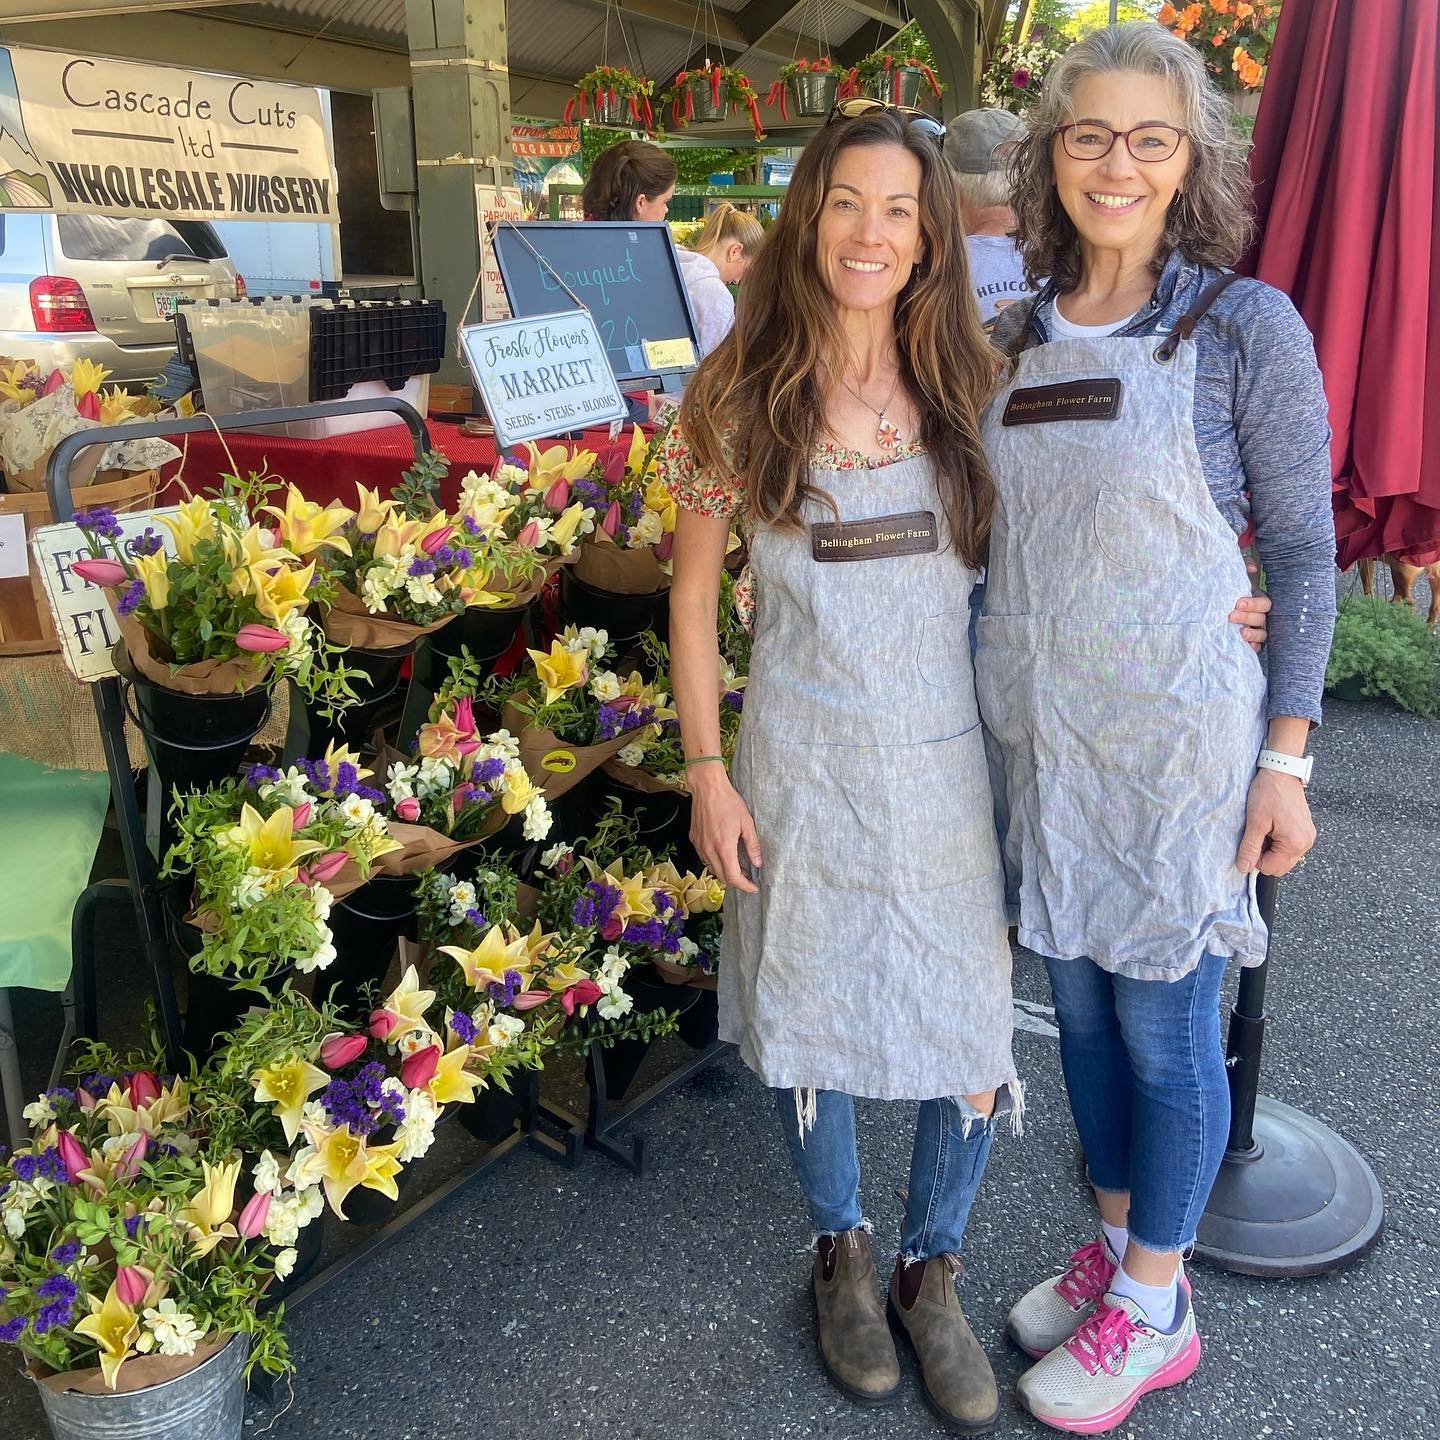 It&rsquo;s Mothers Day Weekend and we are so excited to highlight some of these awesome Mom &amp; kid vendors at the market today! Stop by to show these mamas some love and grab some goodies for your own mama! 💞👑☀️